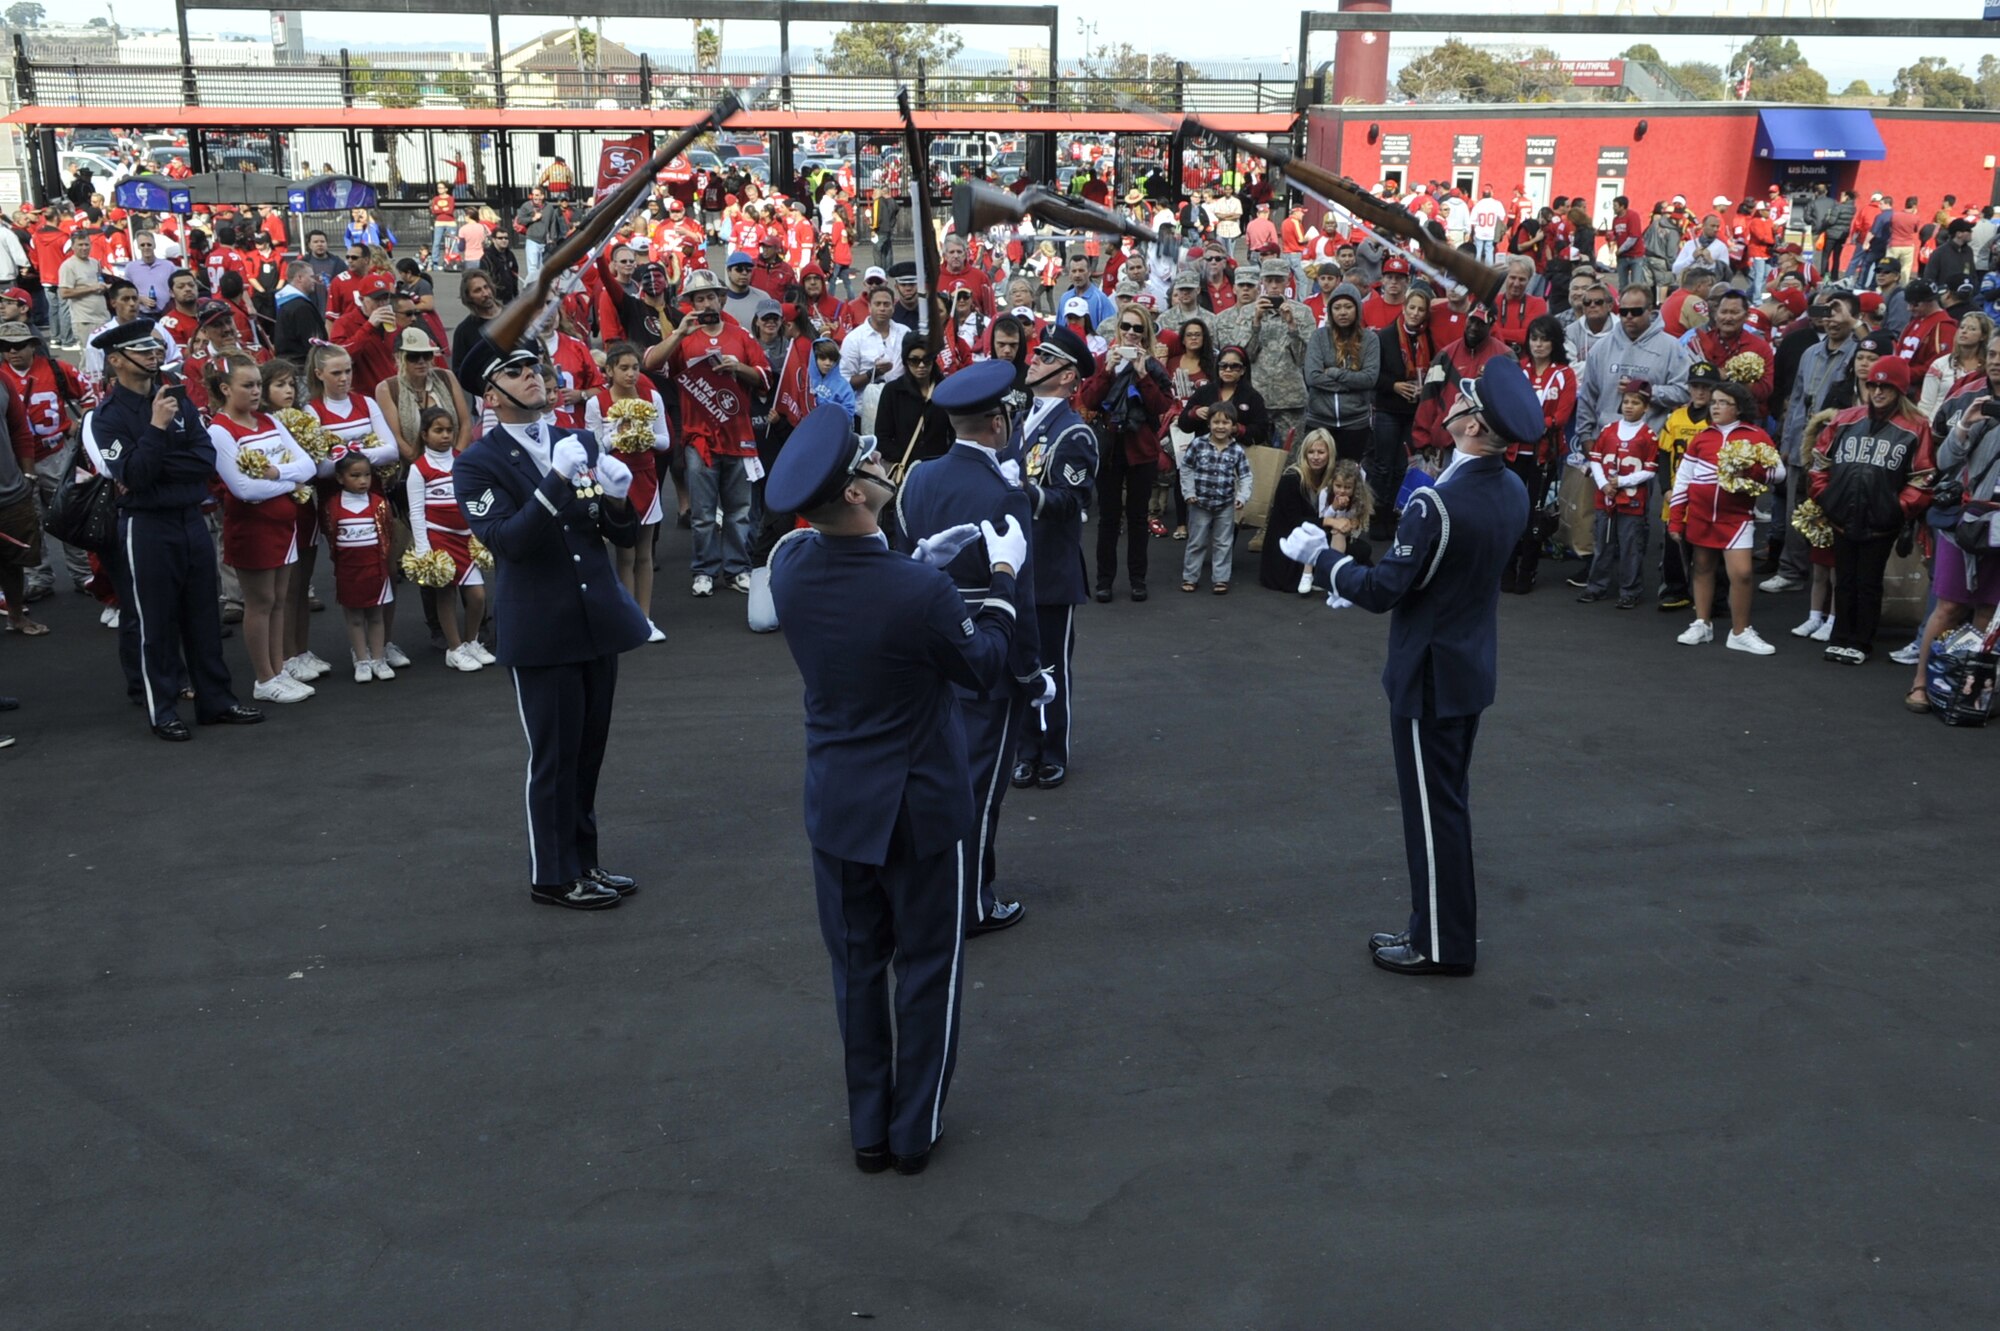 U.S. Air Force Honor Guard Drill Team members conduct a pre-game performance at the Detroit Lions vs. San Francisco 49ers NFL football game at Candlestick Park in San Francisco, Calif., Sept. 16, 2012.  The Drill Team performed in front of more than 500 people before the game and stood on the field during the National Anthem in front of a sold-out crowd.  (U.S. Air Force photo by Senior Master Sgt. Adam M. Stump)